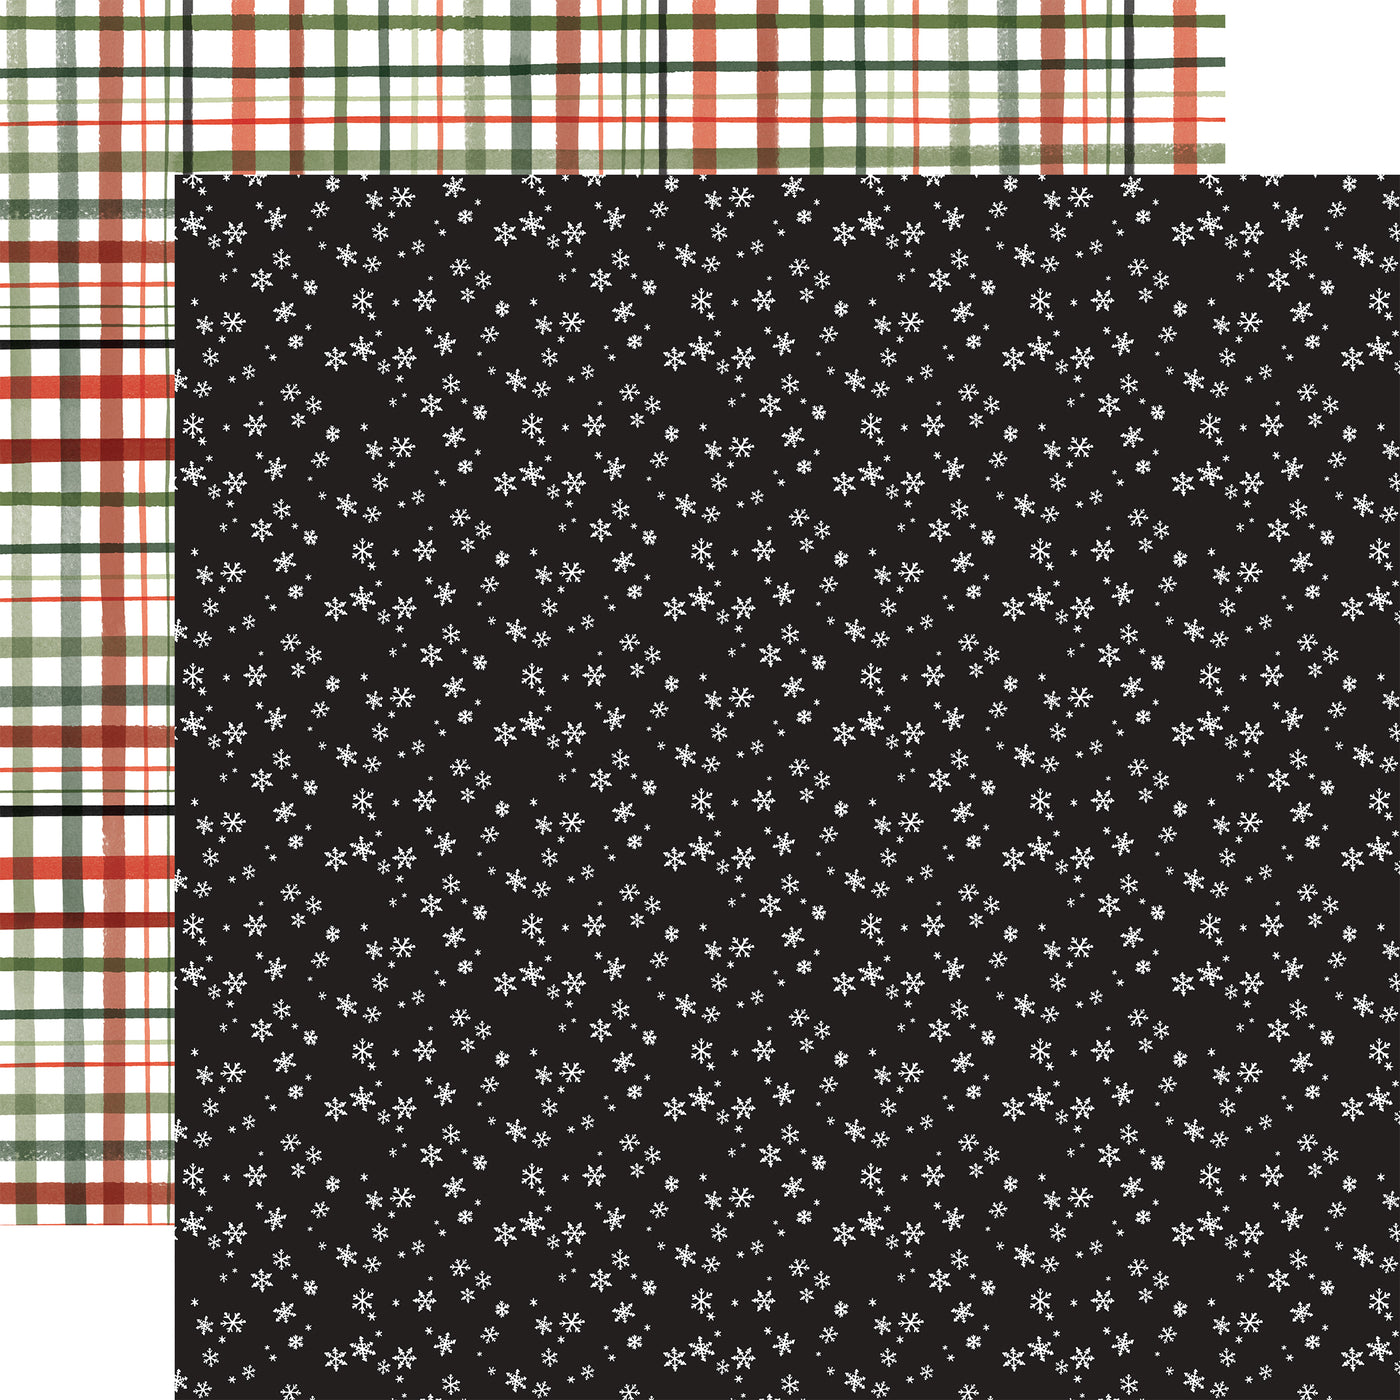 Side A - white snowflakes on black background.  Side B - red and green Christmas plaid.